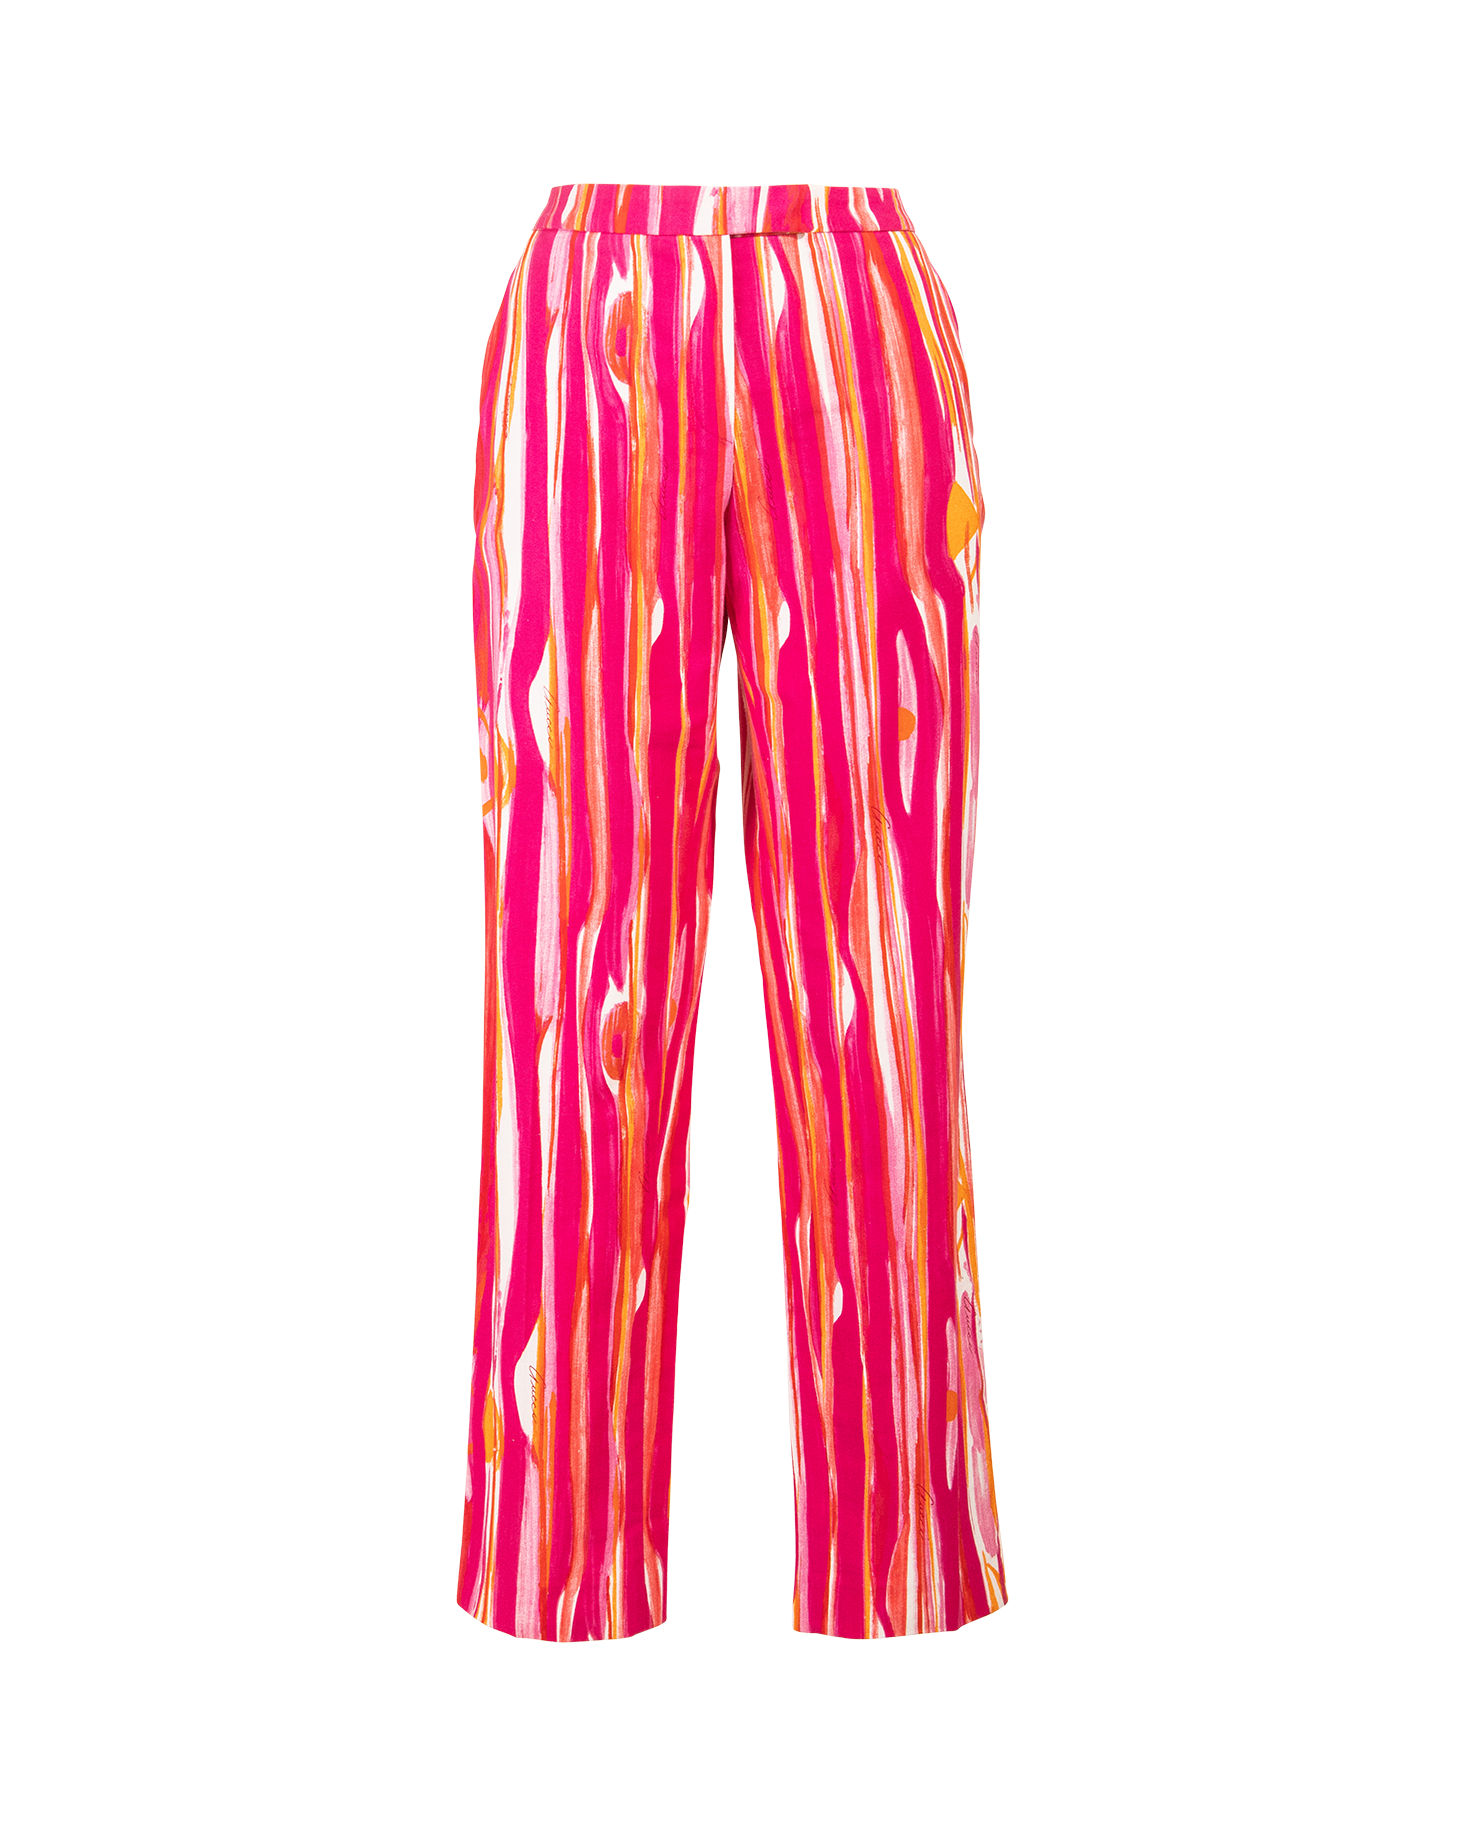 S/S 1996 Pink Pattern Trousers